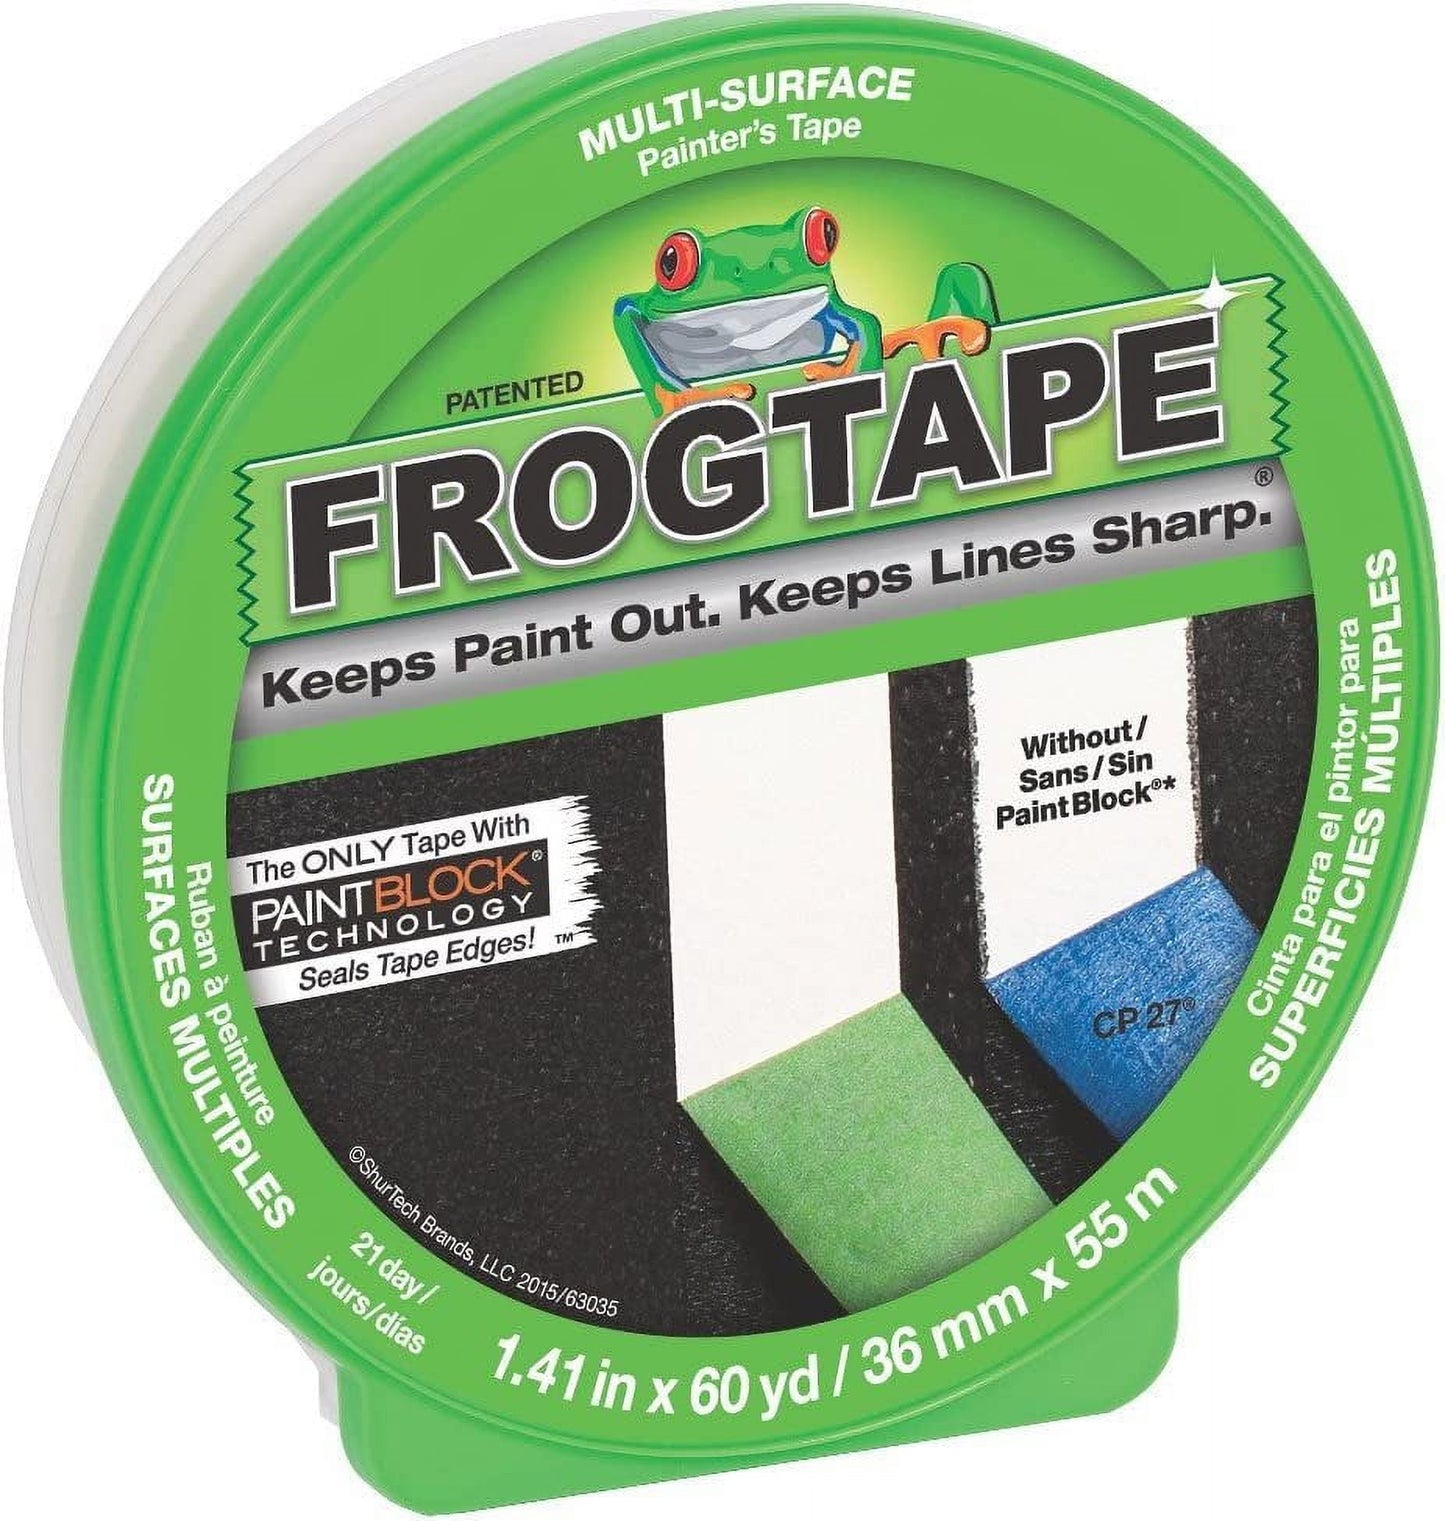 FrogTape 36 mm x 55 m Green Painter's Tape with PaintBlock Technology